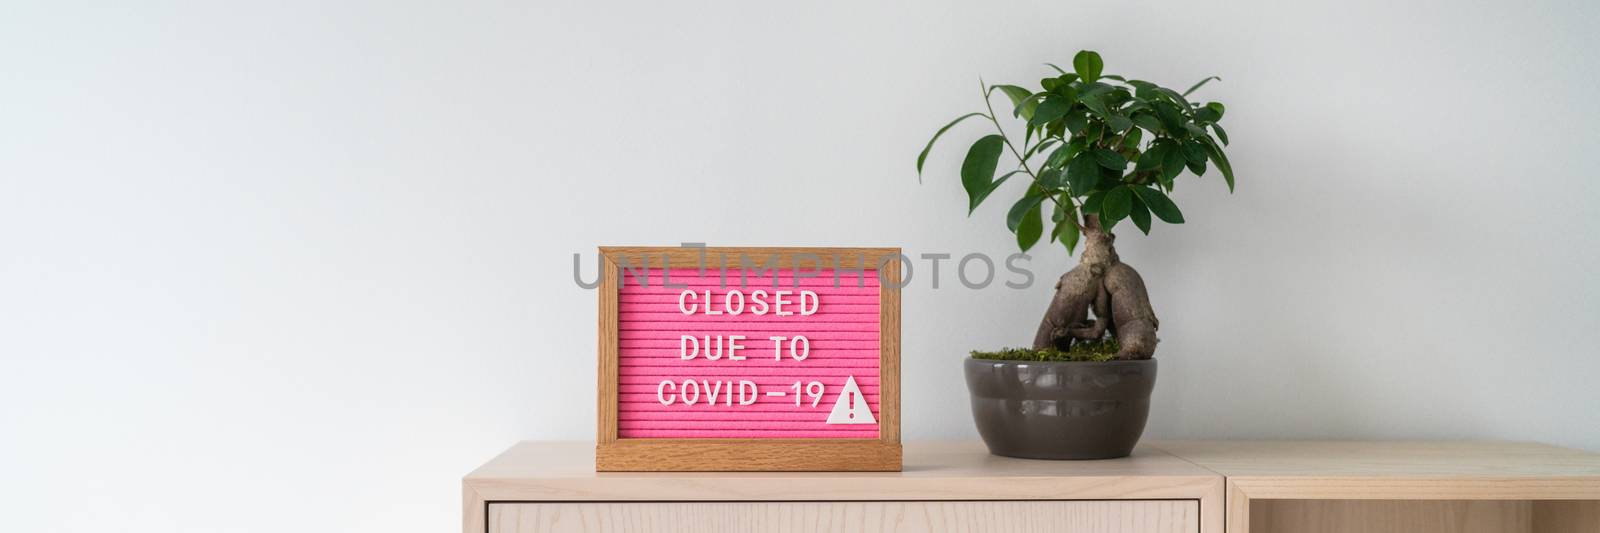 Closed sign at retail store business banner. Pink cute felt letter board on shelf with plant with notice of closure due to COVID-19 small businesses going bankrupt amidst coronavirus by Maridav